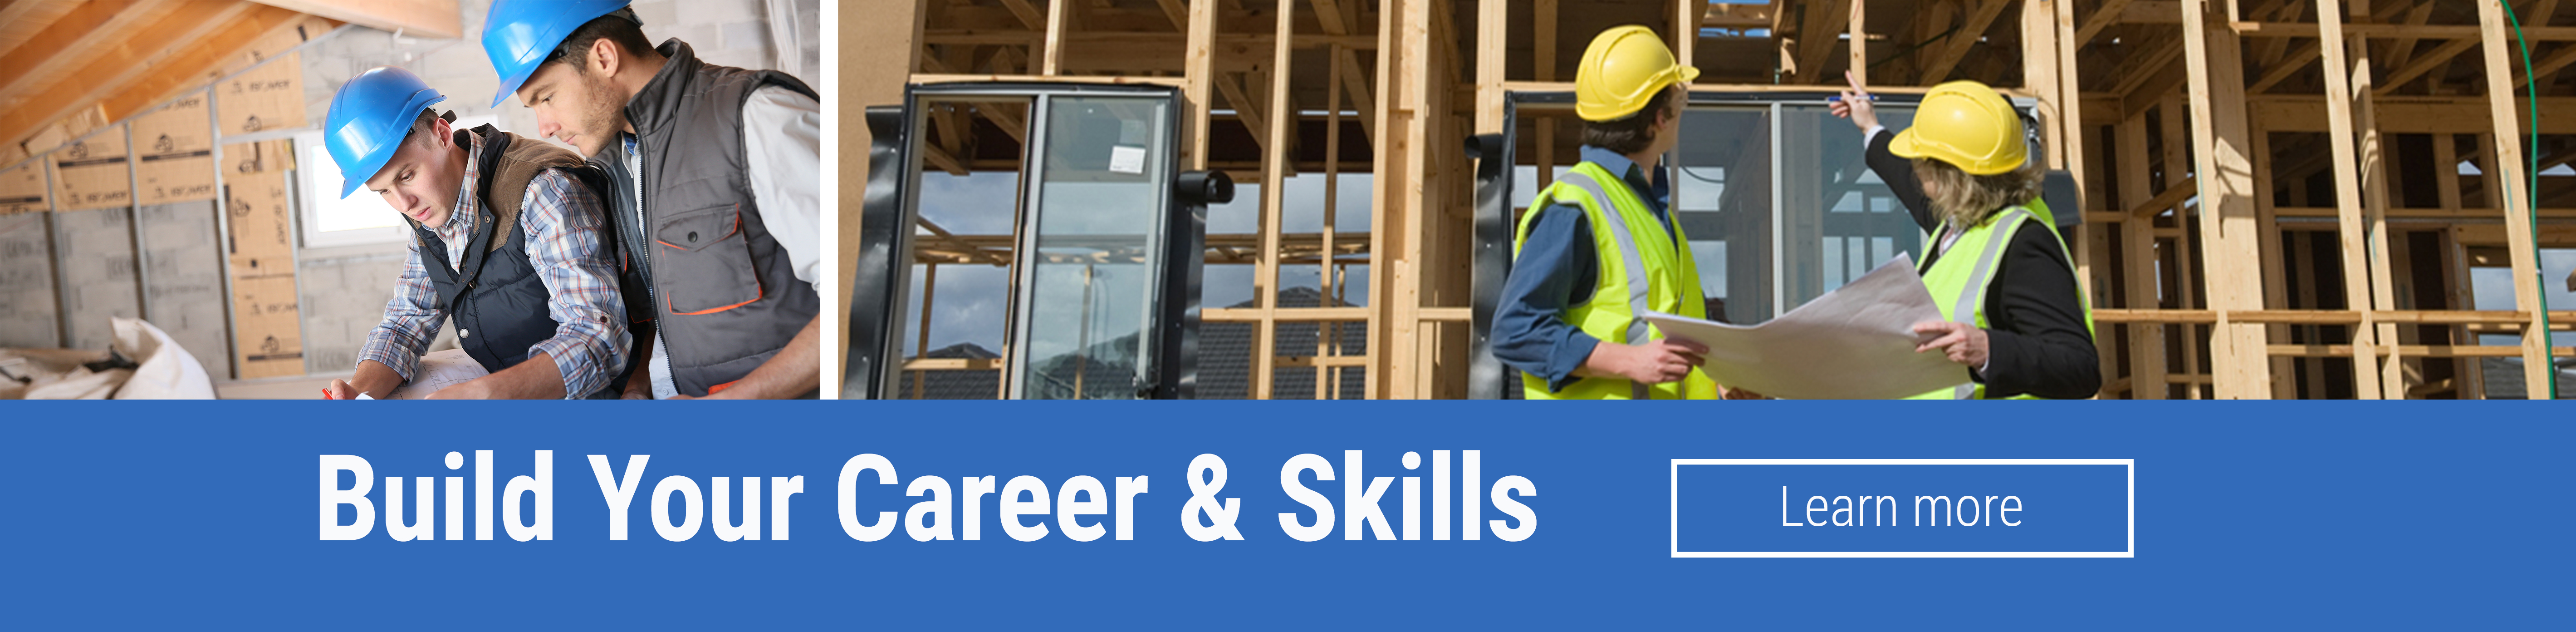 Build Your Career And Skills Banner With Images Of Construction Workers